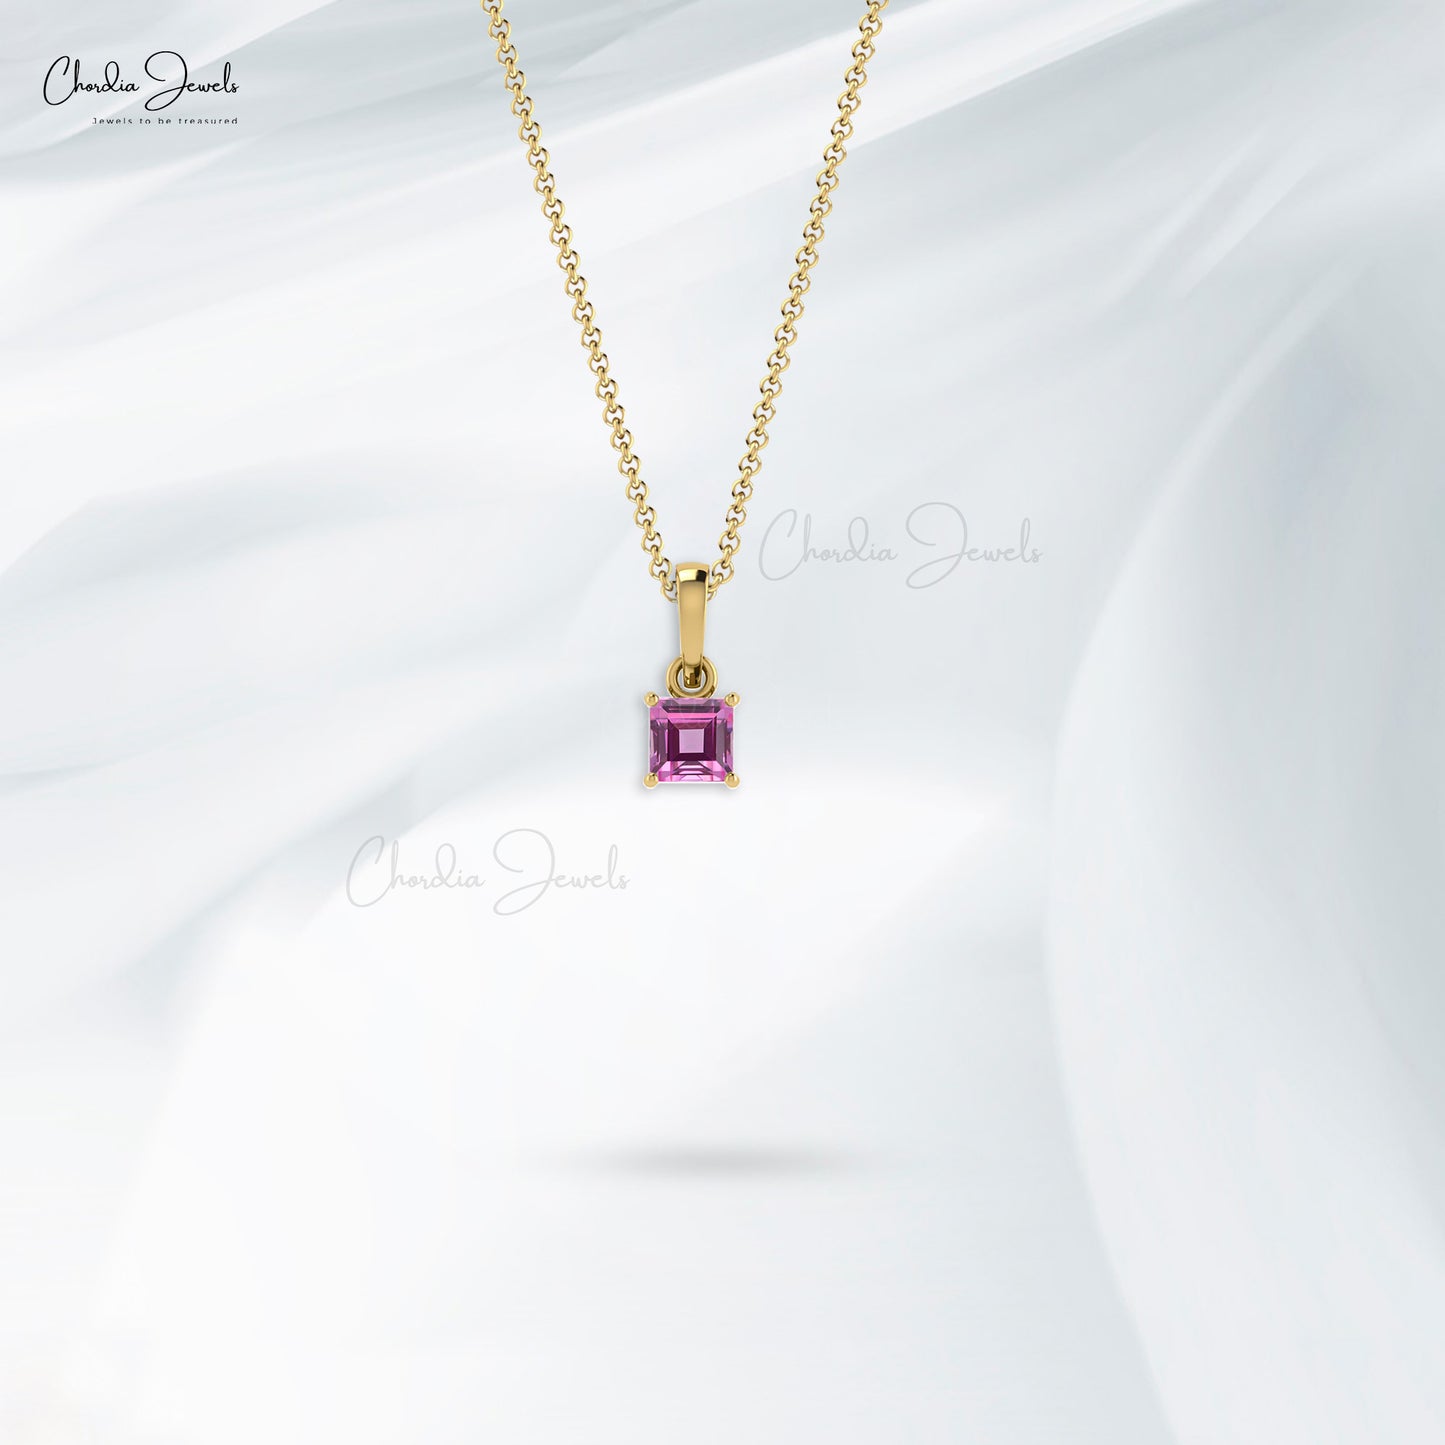 Load image into Gallery viewer, Genuine Pink Sapphire Solitaire Pendant 4mm Square Cut Gemstone Handmade Pendant Necklace 14k Real Gold Affordable Jewelry
